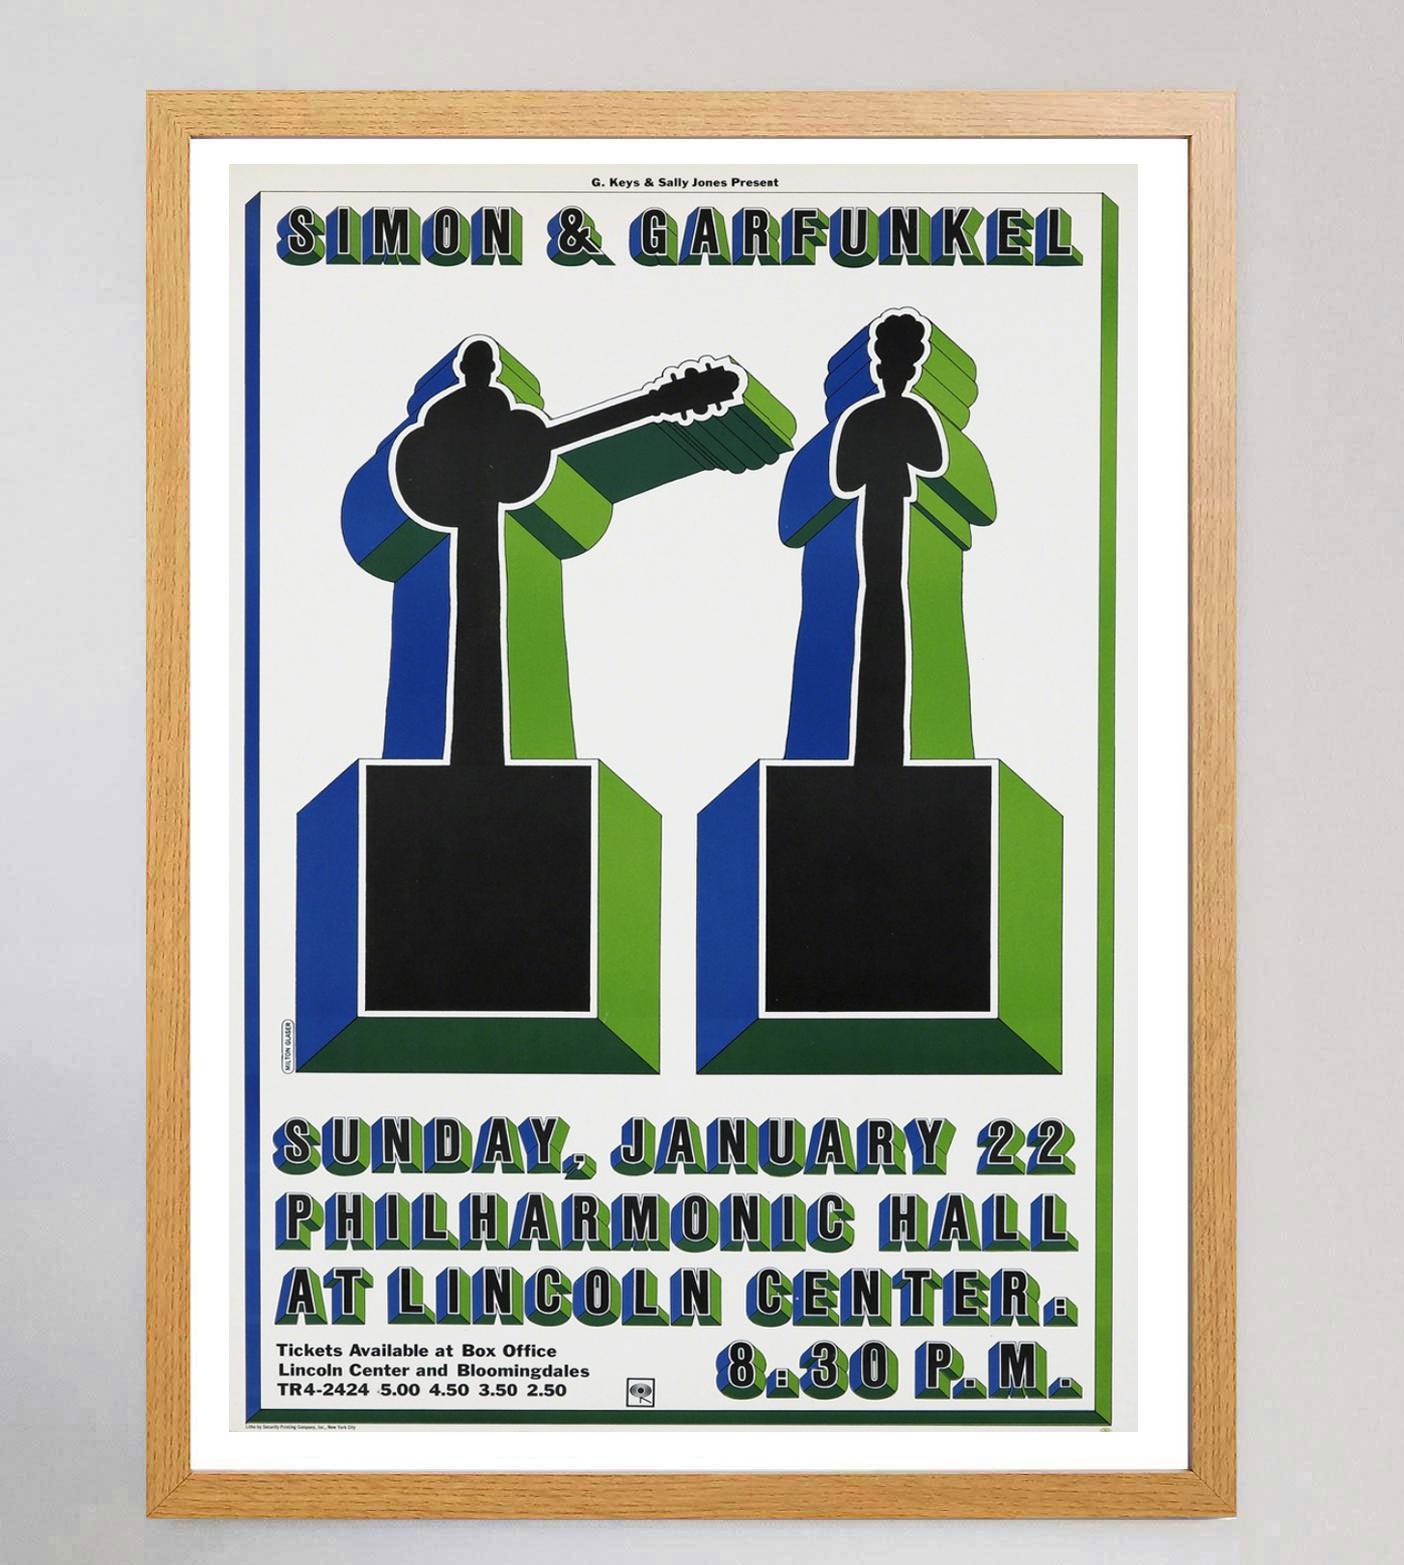 Beautiful lithographic poster created in 1967 to promote Simon & Garfunkel's show at Philharmonic Hall at Lincoln Center in New York City. The concert was held on January 22 1967 at 8:30pm and came just after the release of the legendary folk duo's